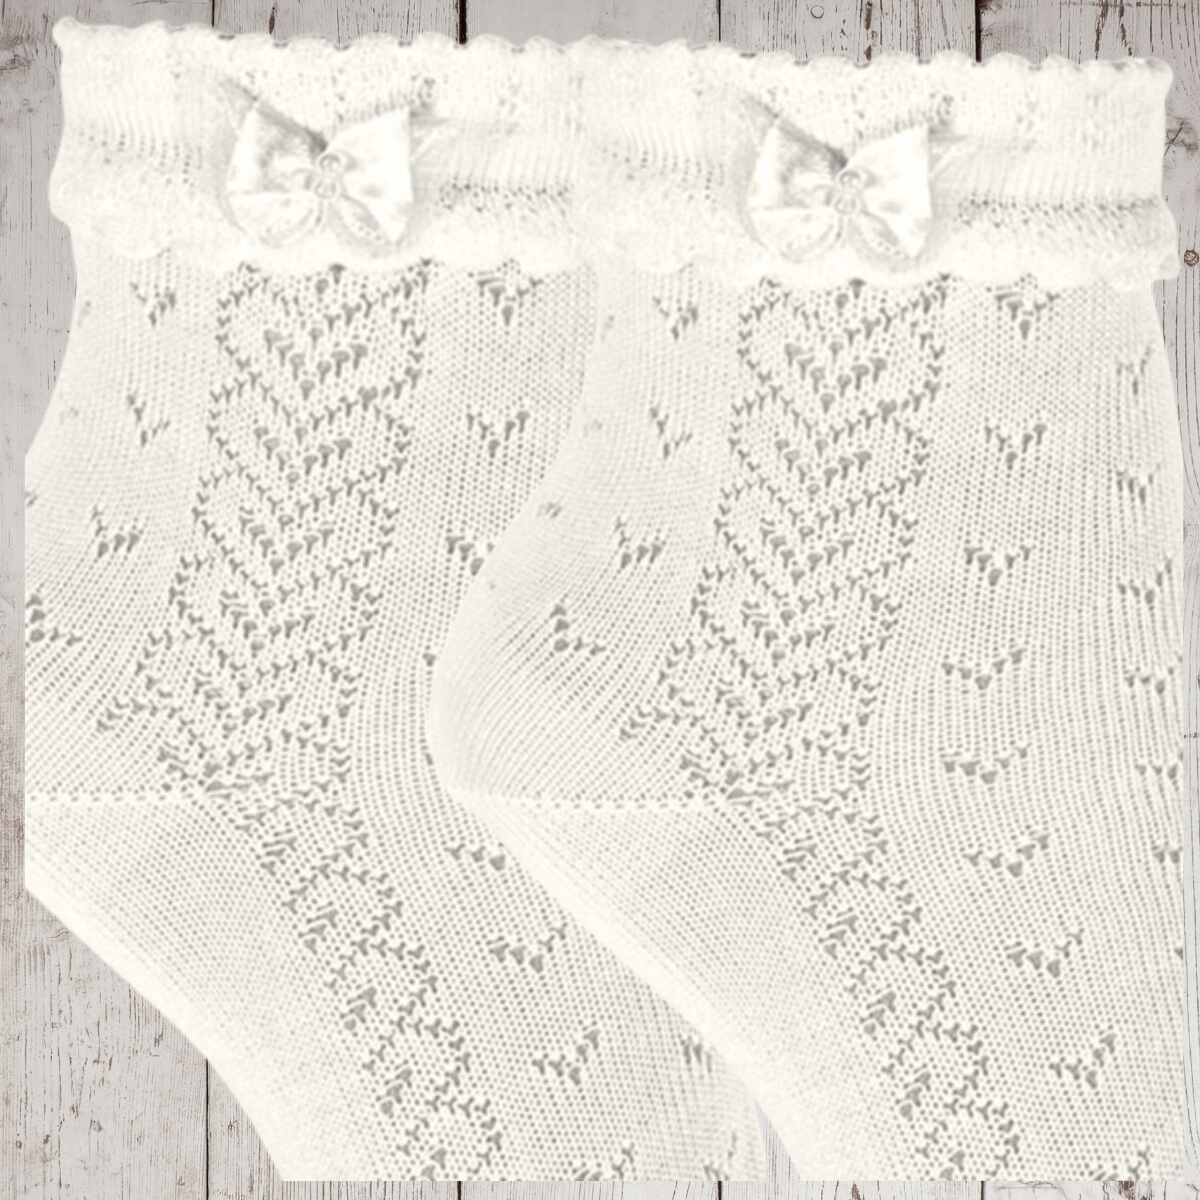 CEREMONY OPENWORK ANKLE SOCKS WITH BOW CONDOR - 4